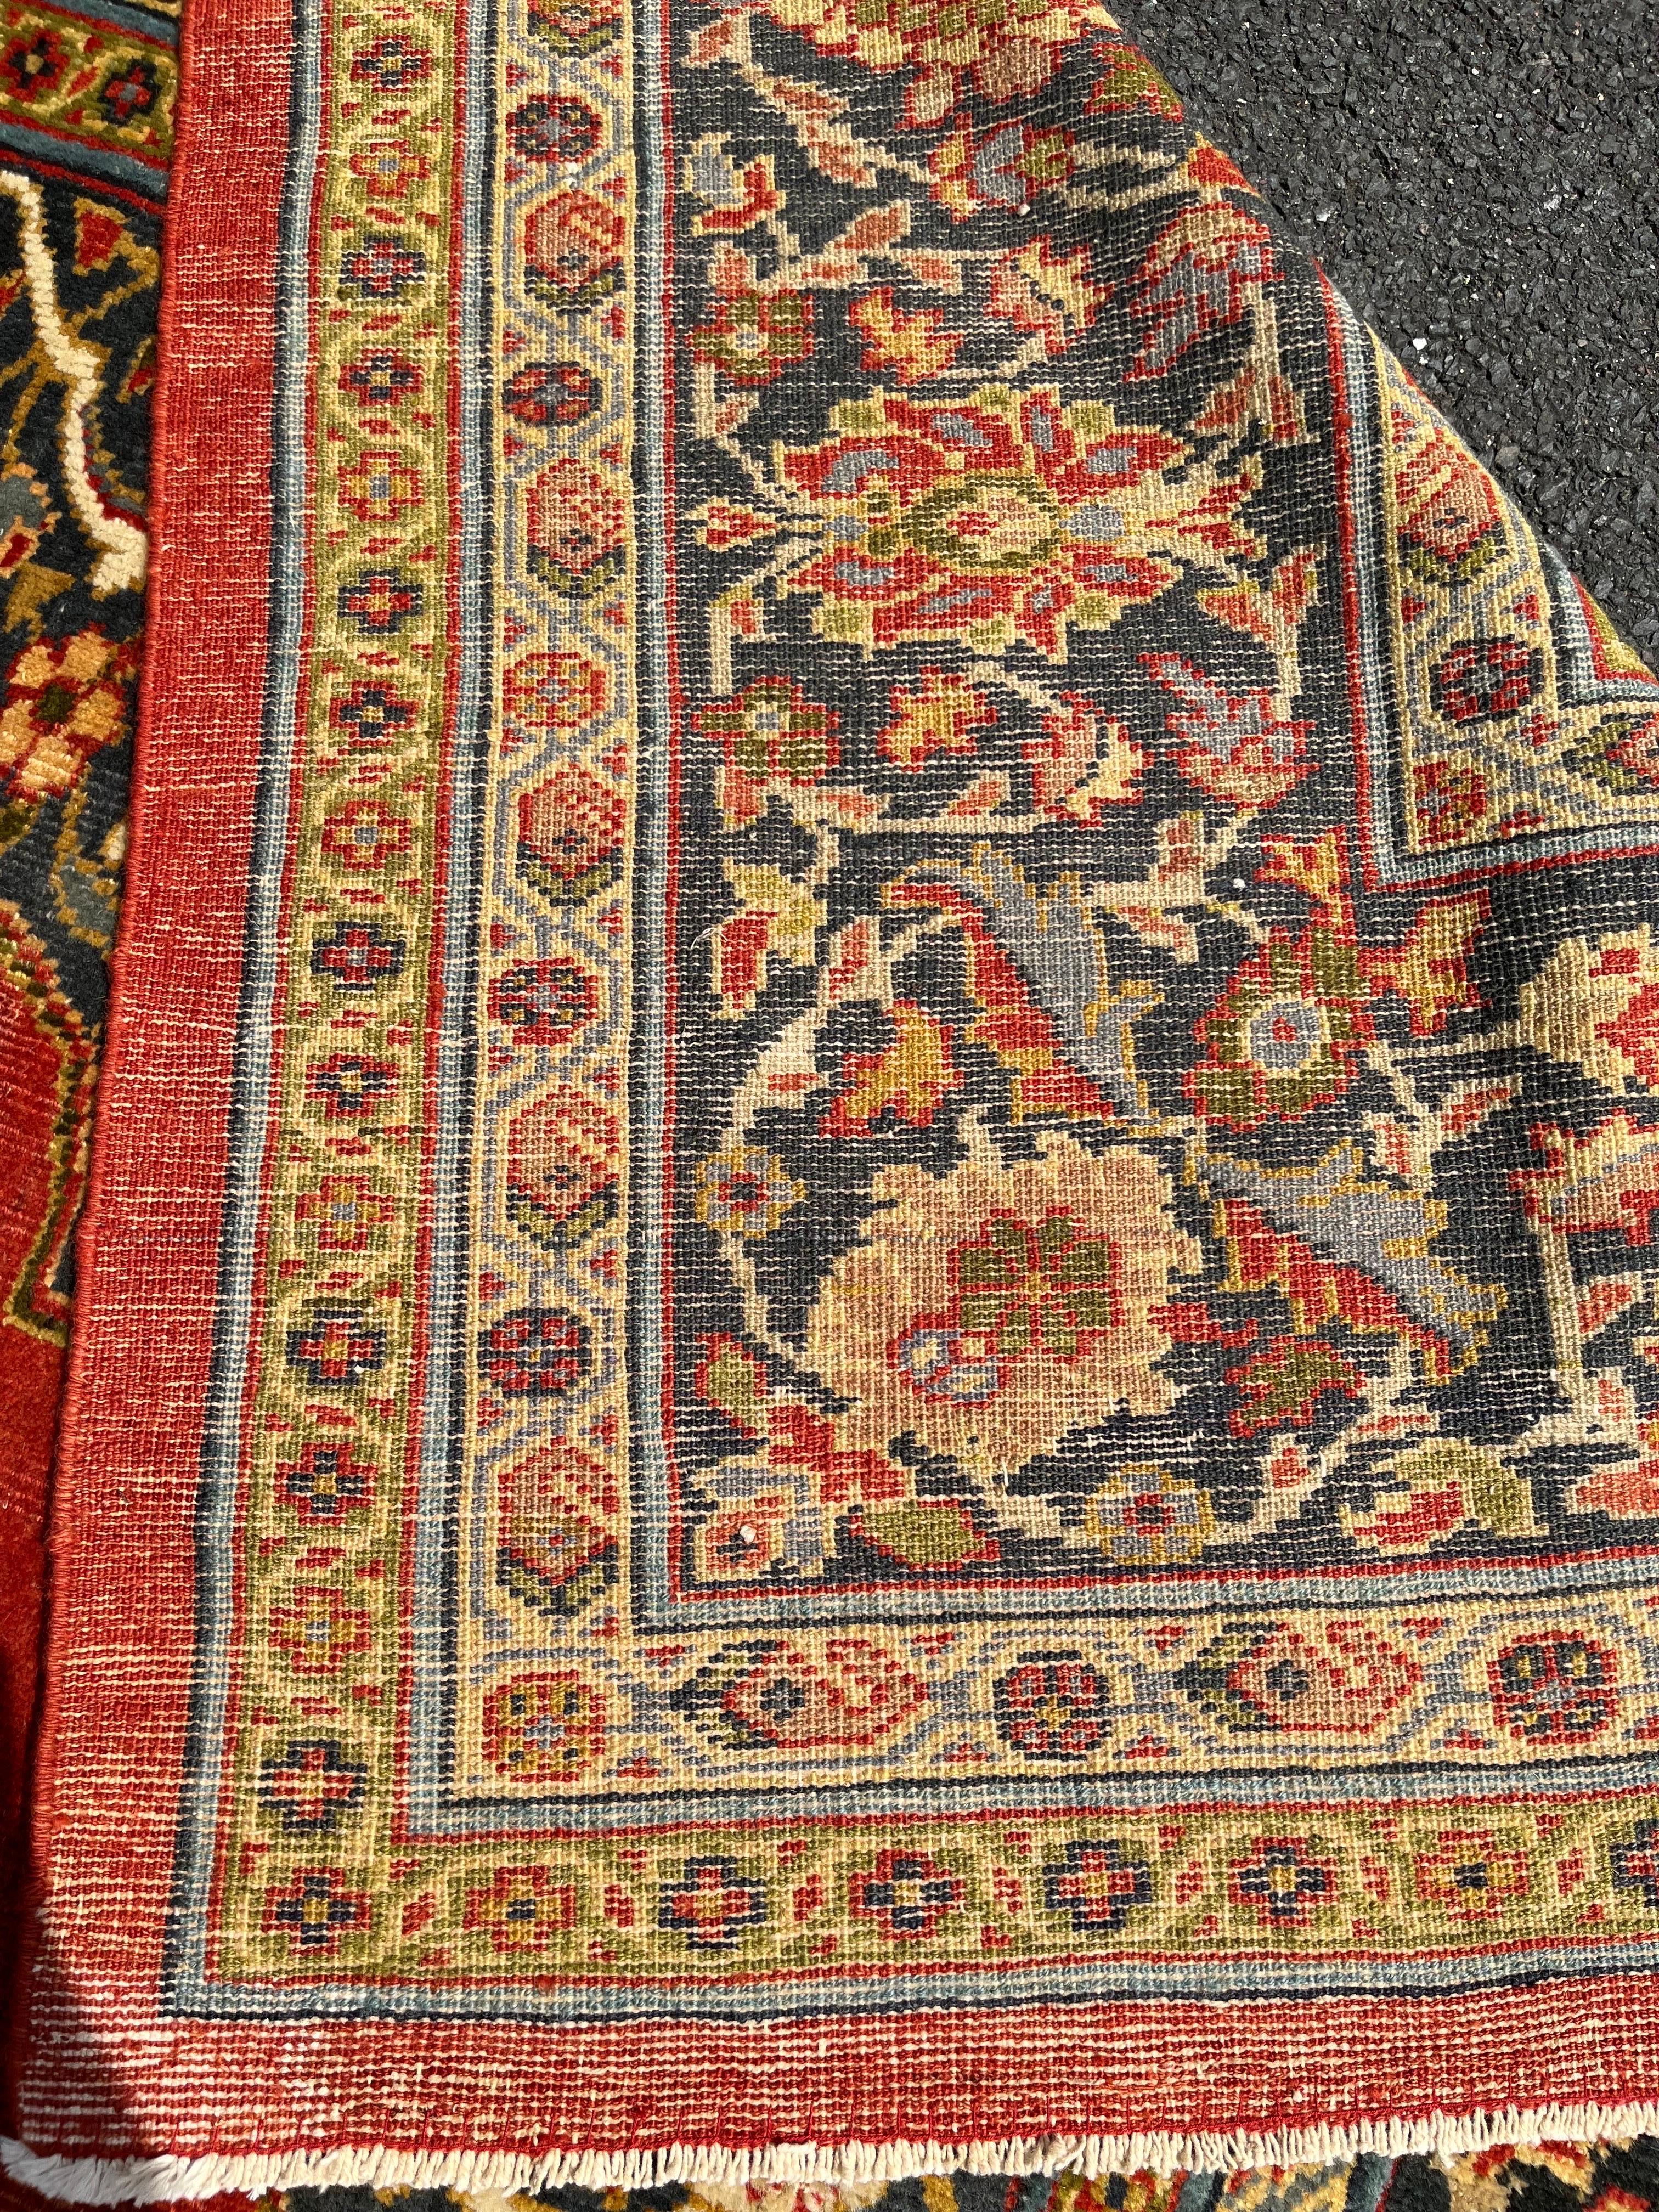 19th Cent. Persian Sultanabad Handmade Wool Rug with Striking Vegetable Dyes In Good Condition For Sale In Prospect, CT